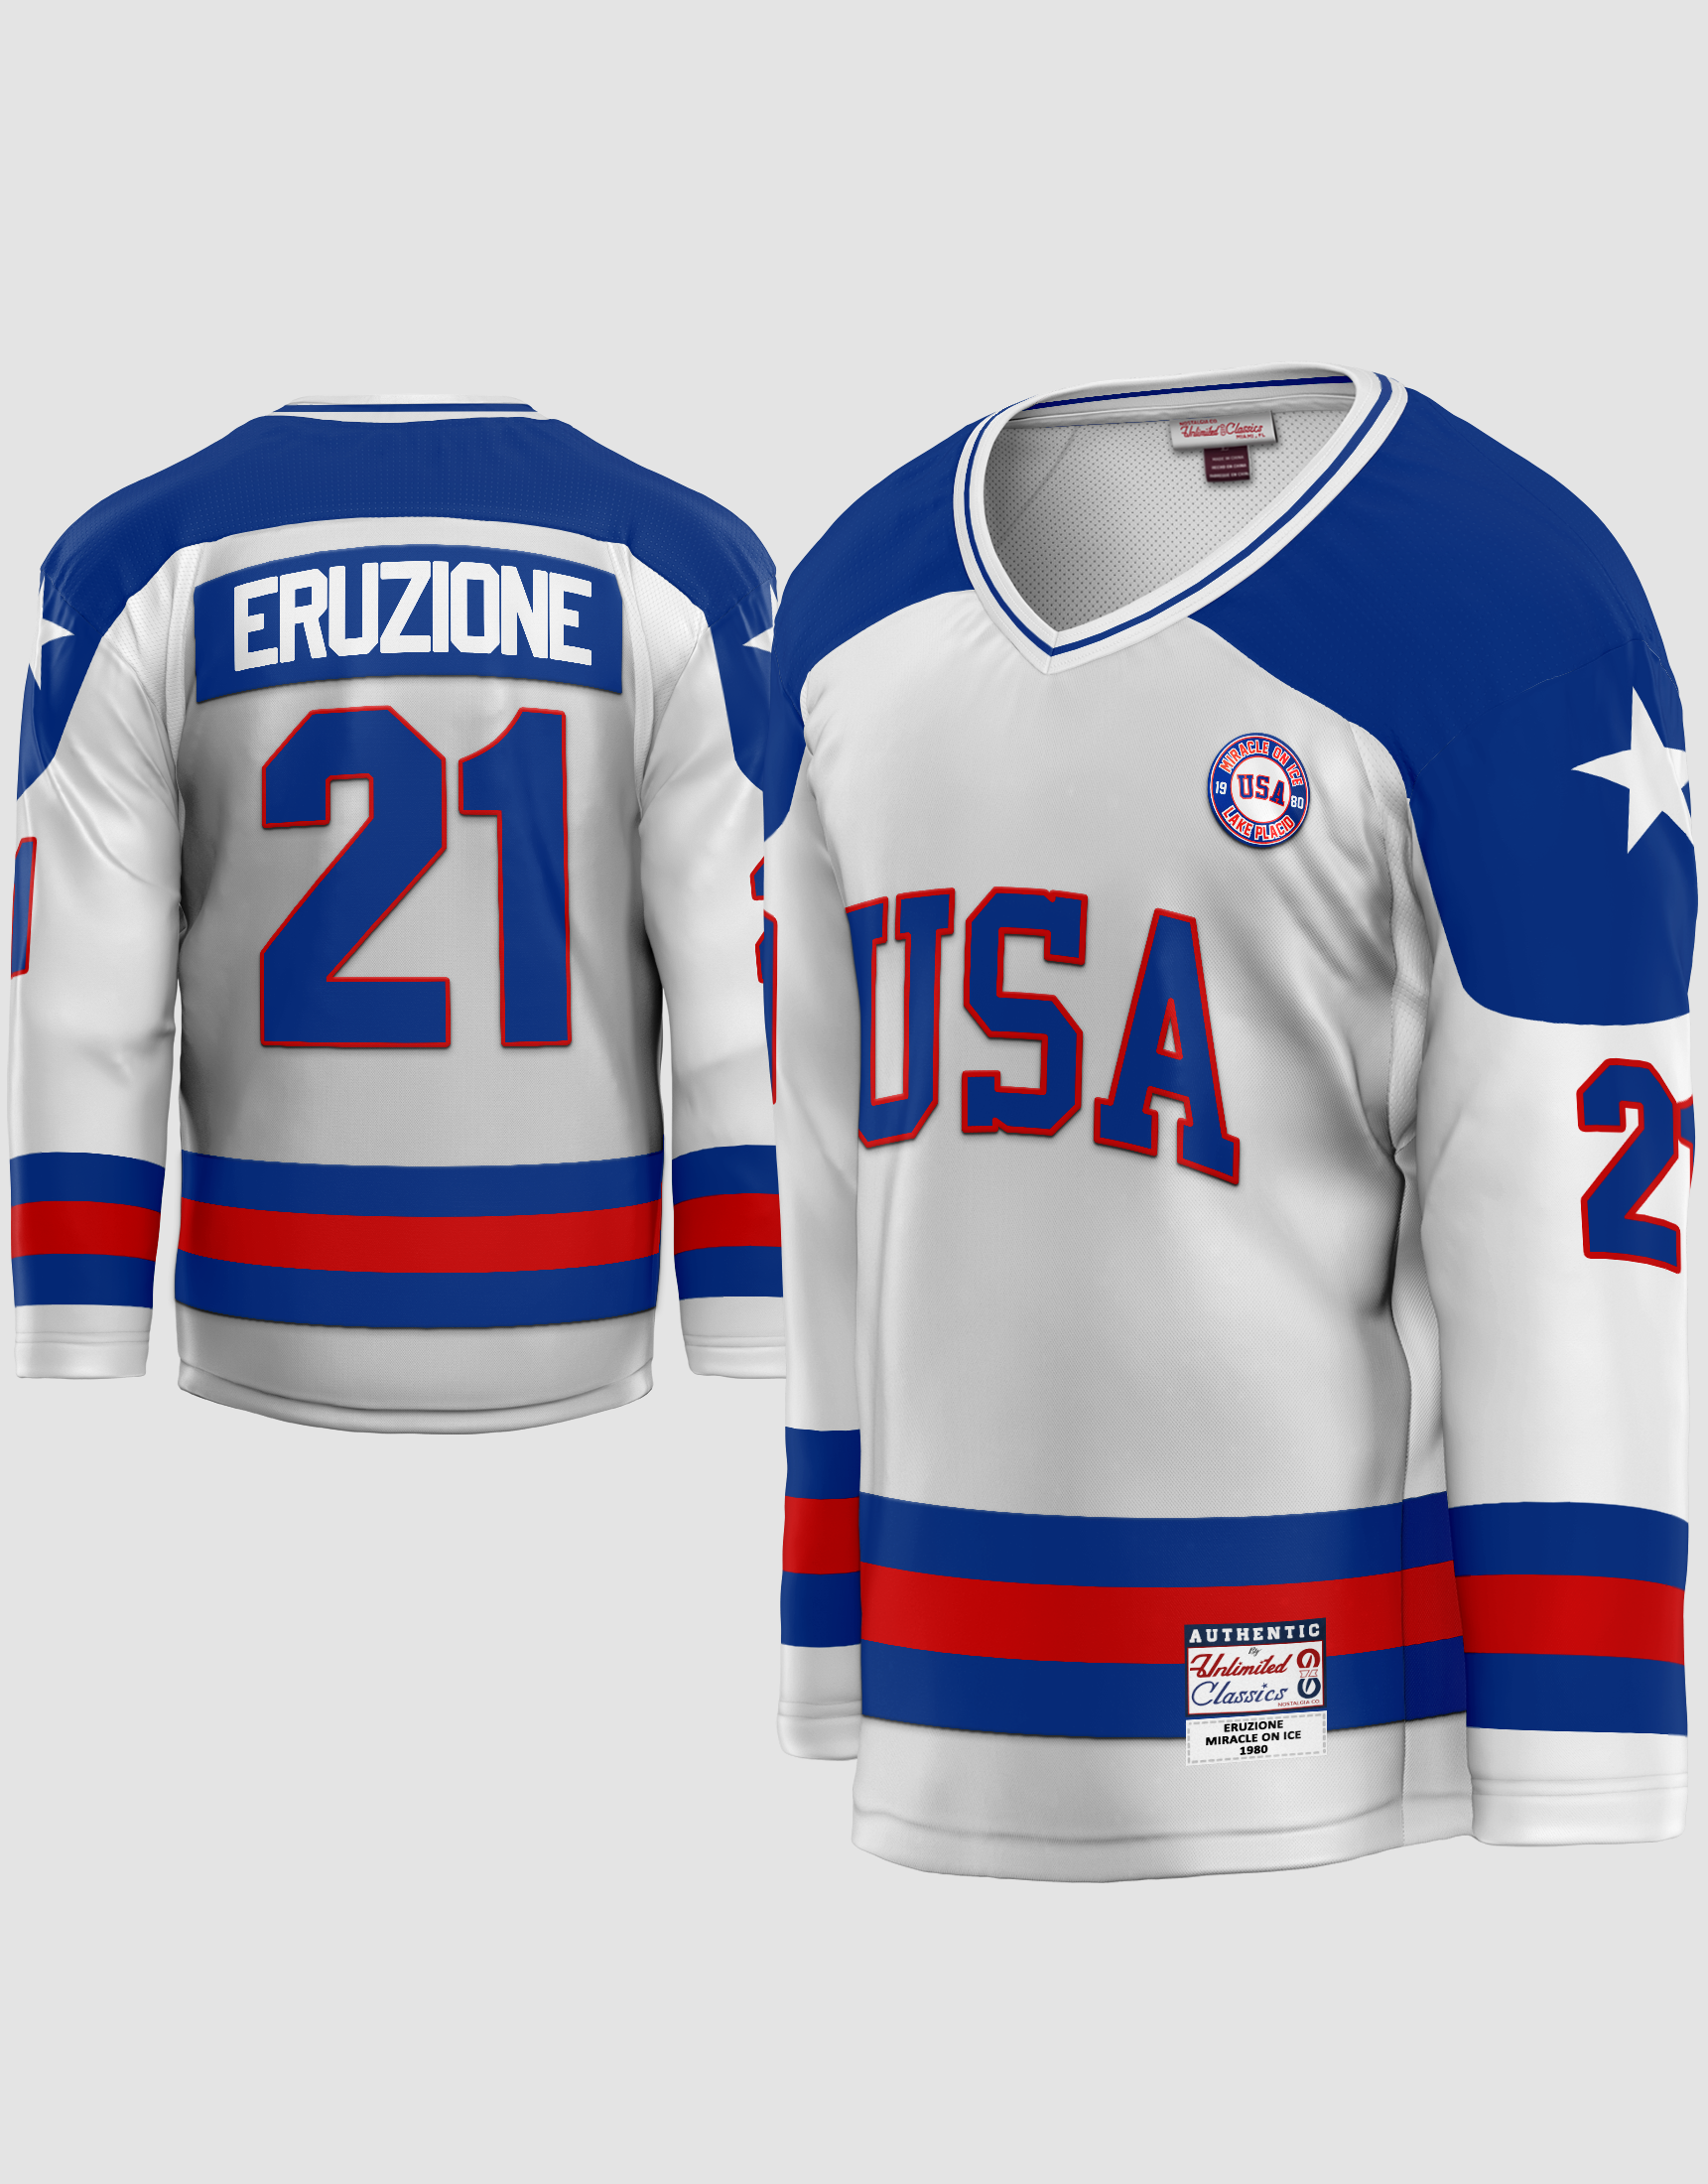 to Die for Collectibles 1980 USA “Miracle on Ice” #21 Captain Mike Eruzione White Olympic Hockey Jersey, Size XXL